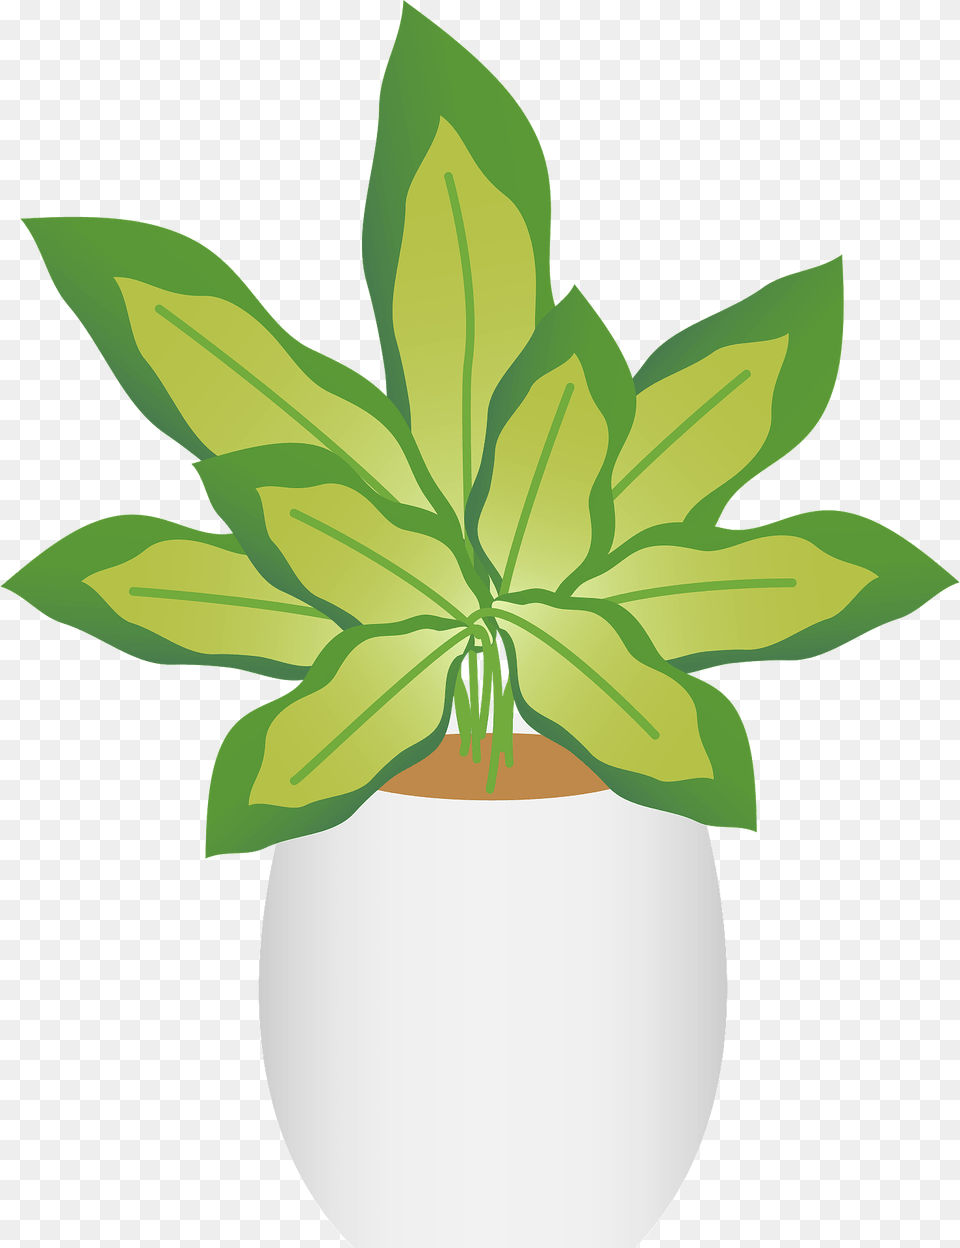 Dieffenbachia Or Dumb Cane In A White Pot Clipart, Jar, Leaf, Plant, Planter Free Png Download